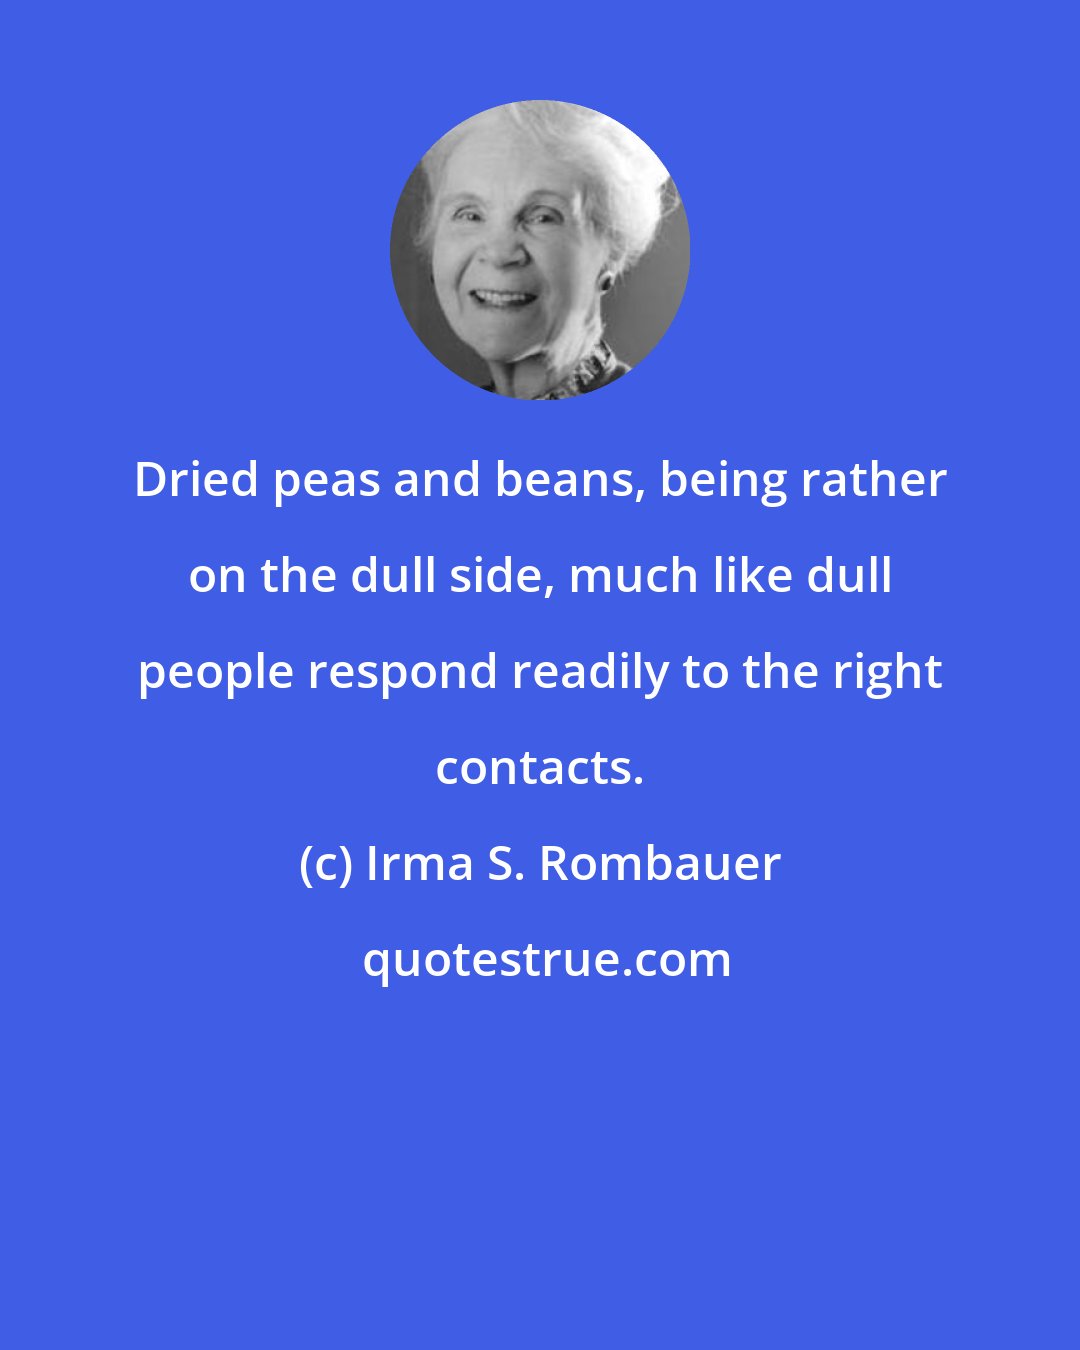 Irma S. Rombauer: Dried peas and beans, being rather on the dull side, much like dull people respond readily to the right contacts.